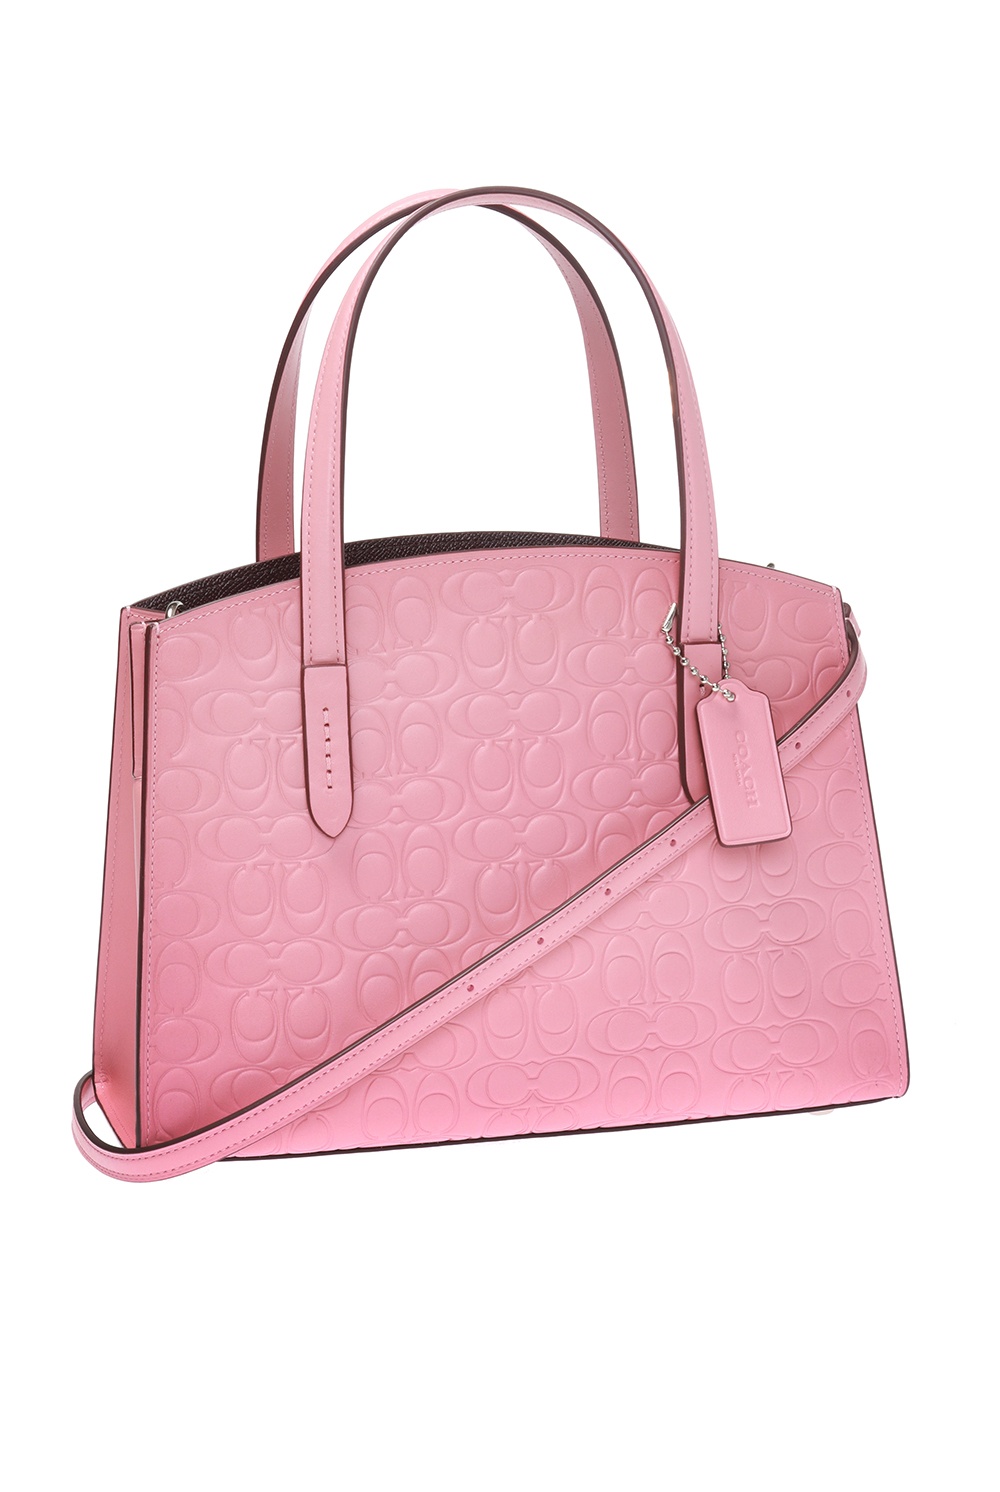 COACH Charlie Carryall in Pink